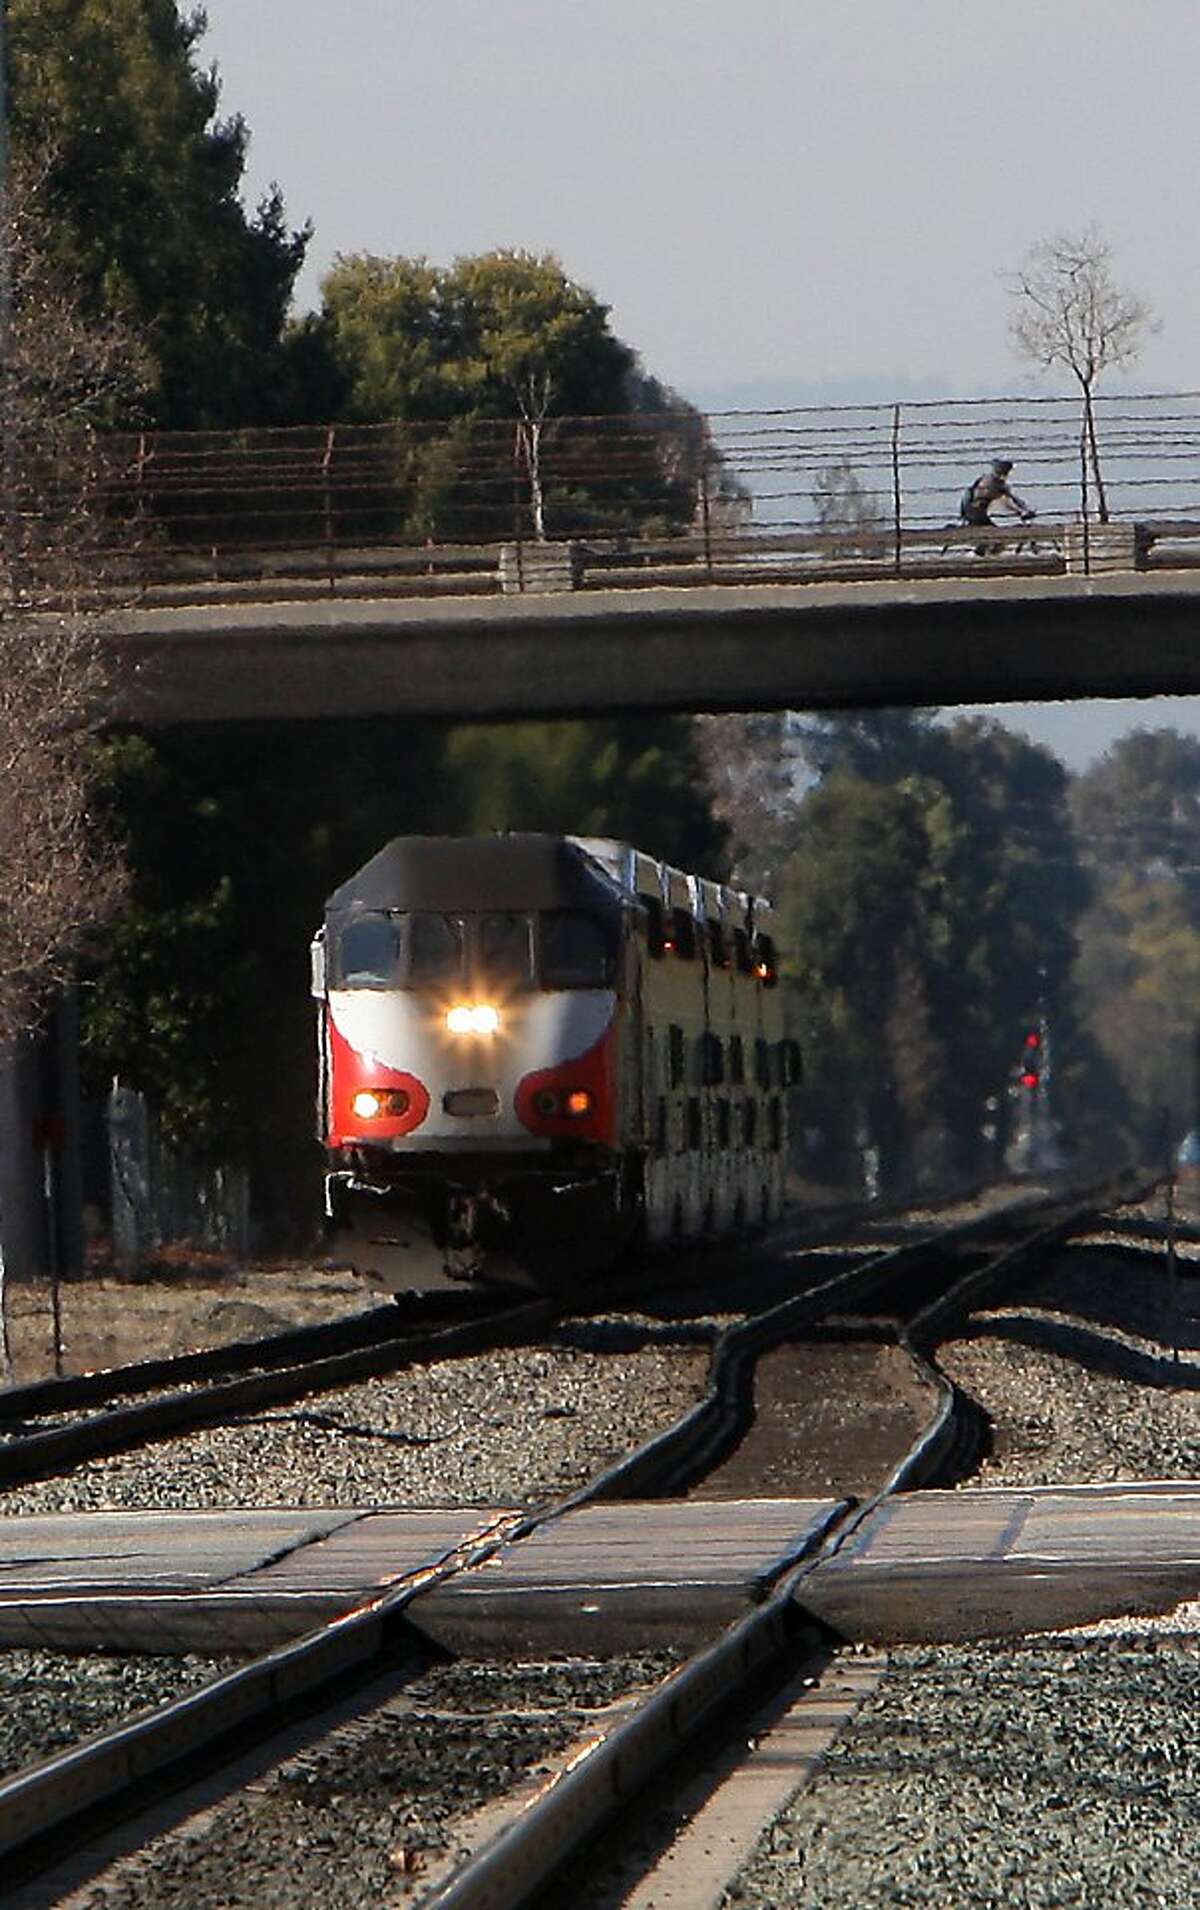 A southbound Caltrain arriving at the station in Mountain View, Calif., on Thursday, February 9, 2012. Caltrain between San Francisco to San Jose is seeing electrified trains as a potential to the commuter rail line.